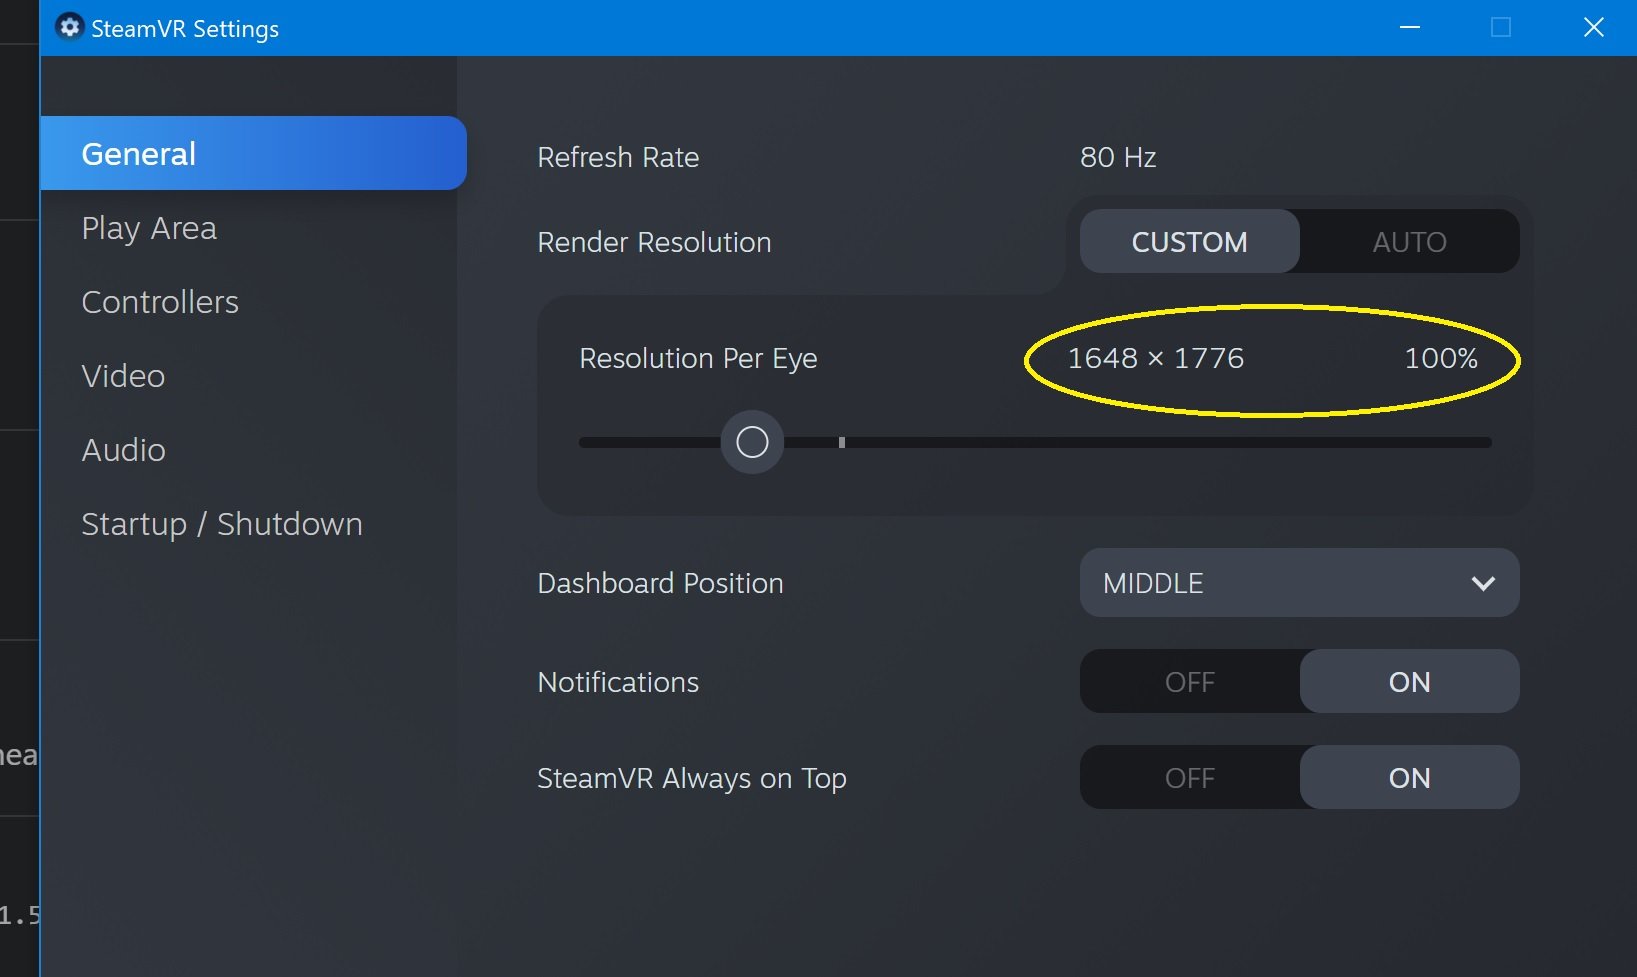 How To Increase Game Settings On Oculus Rift